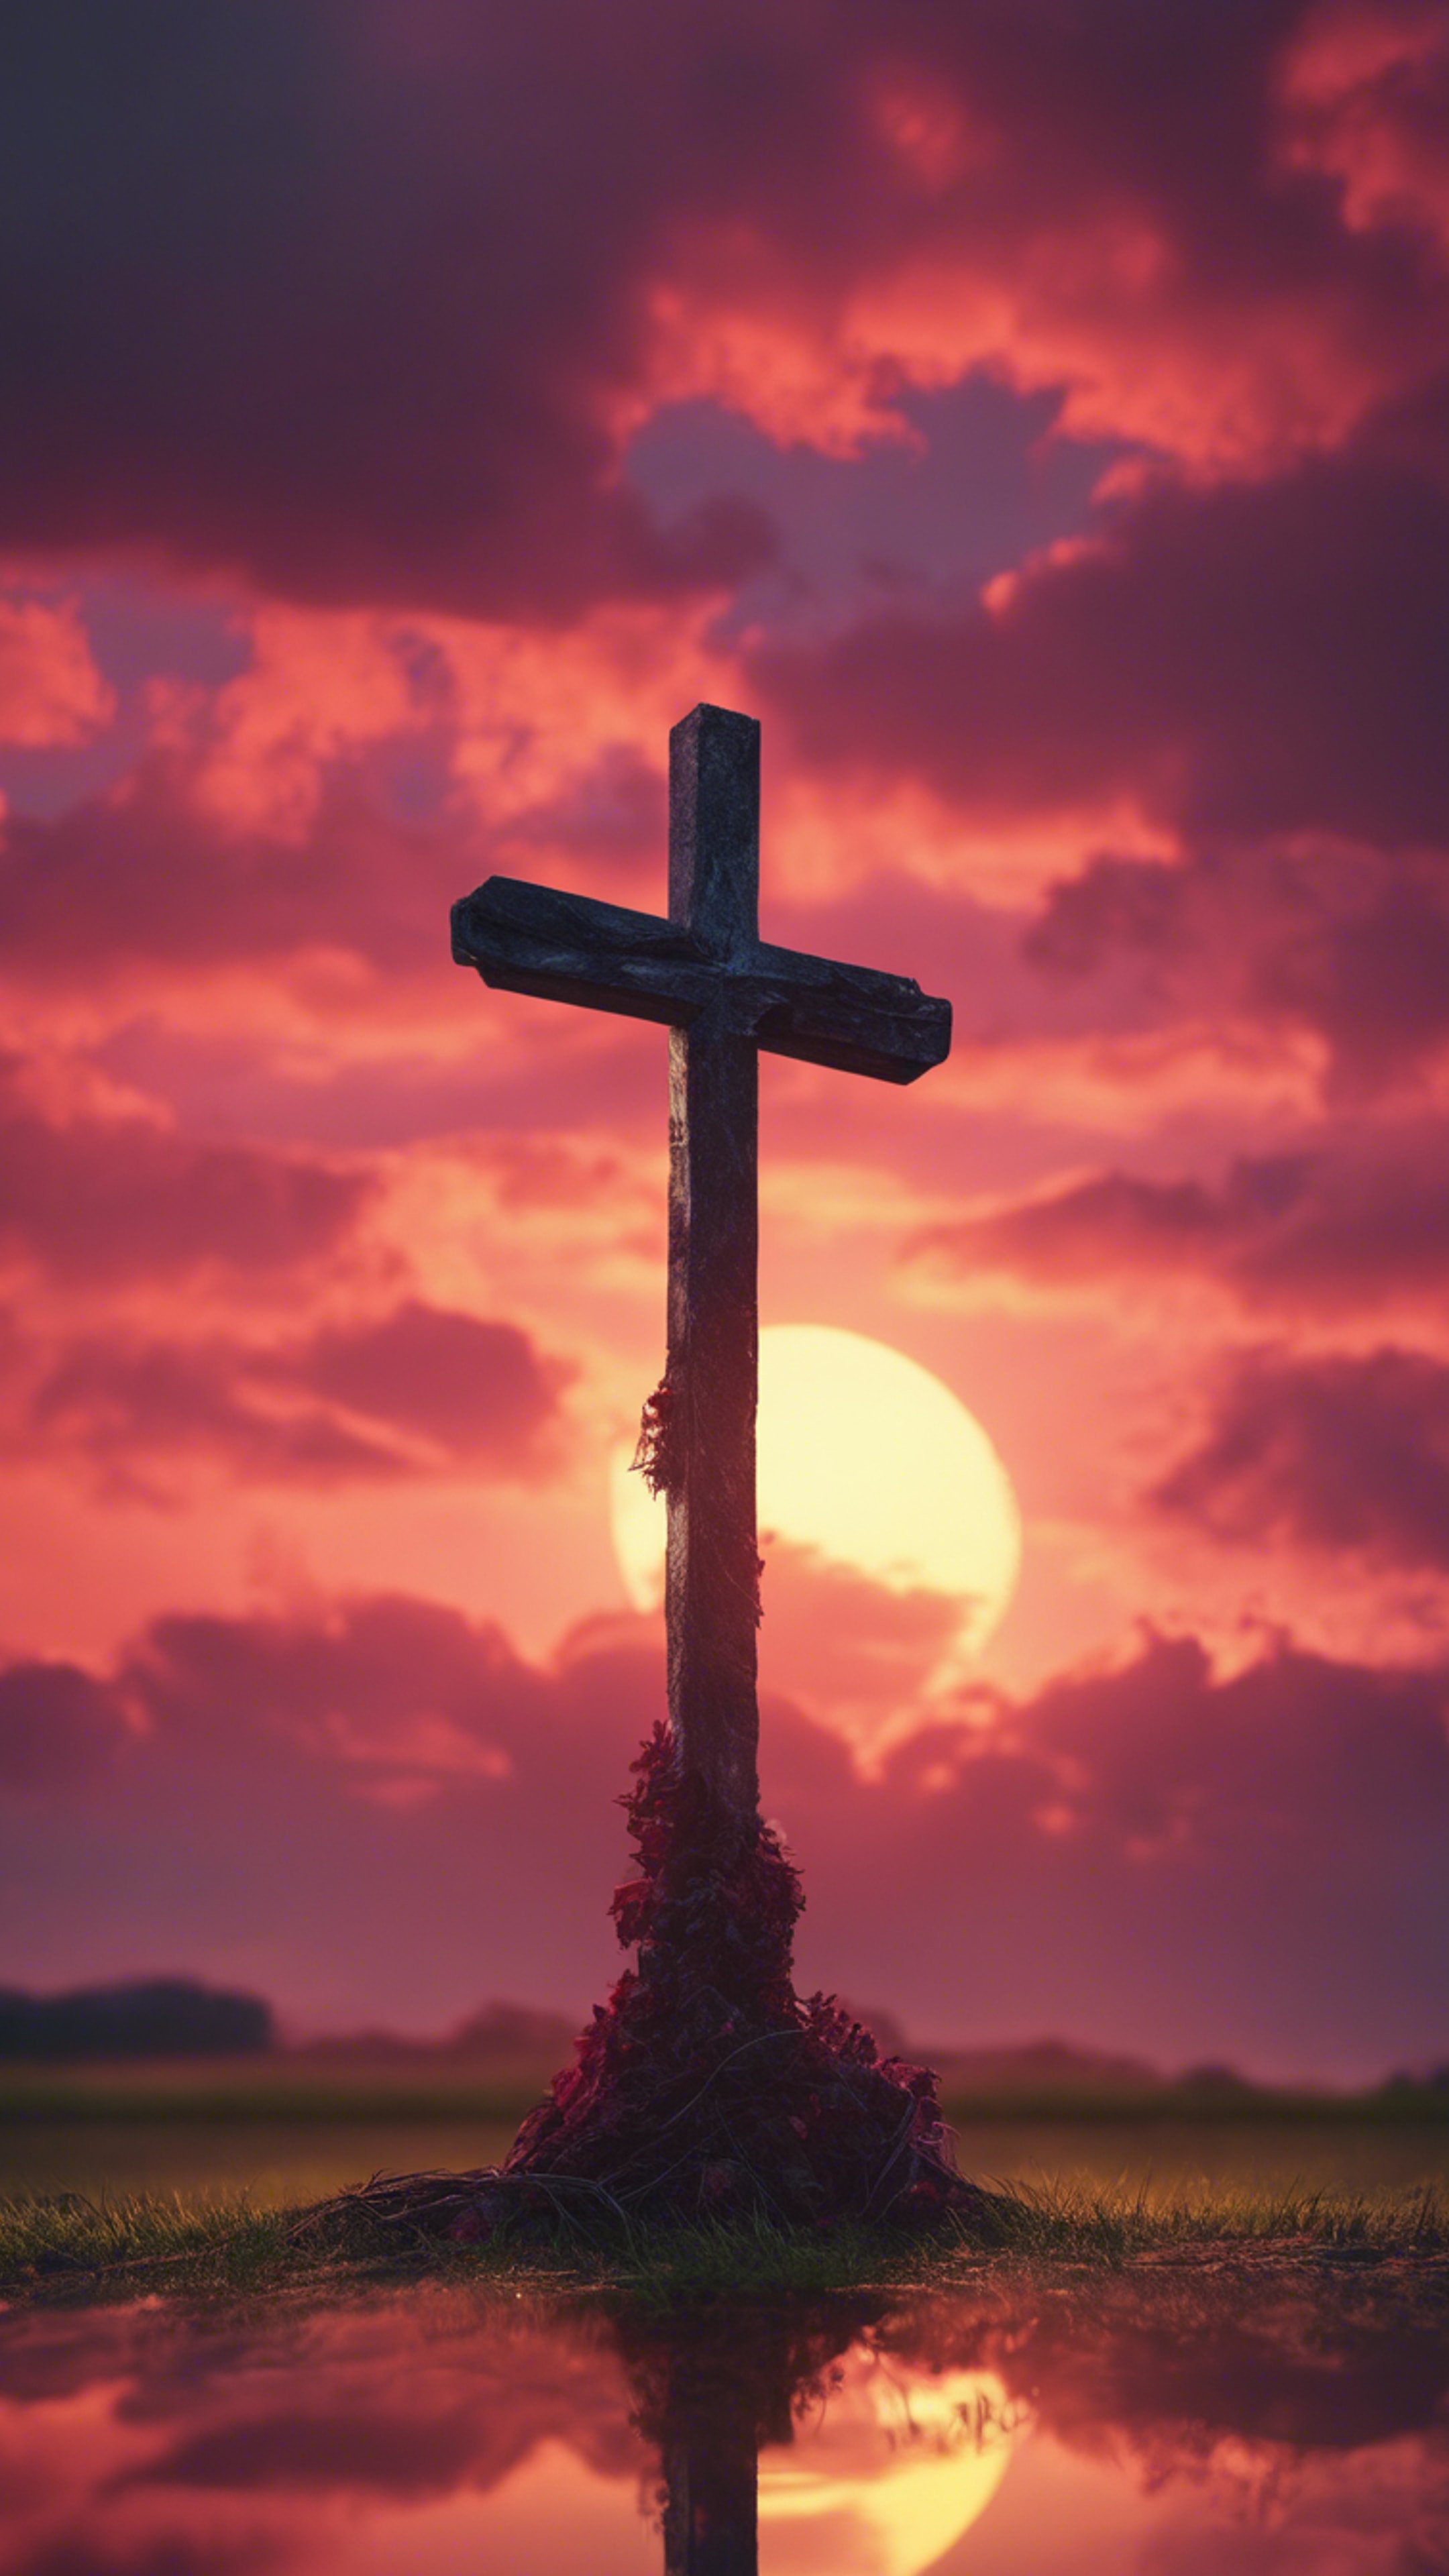 A cross standing against the crimson colors of a sunset sky. 墙纸[b41808c7967b41aa9e40]